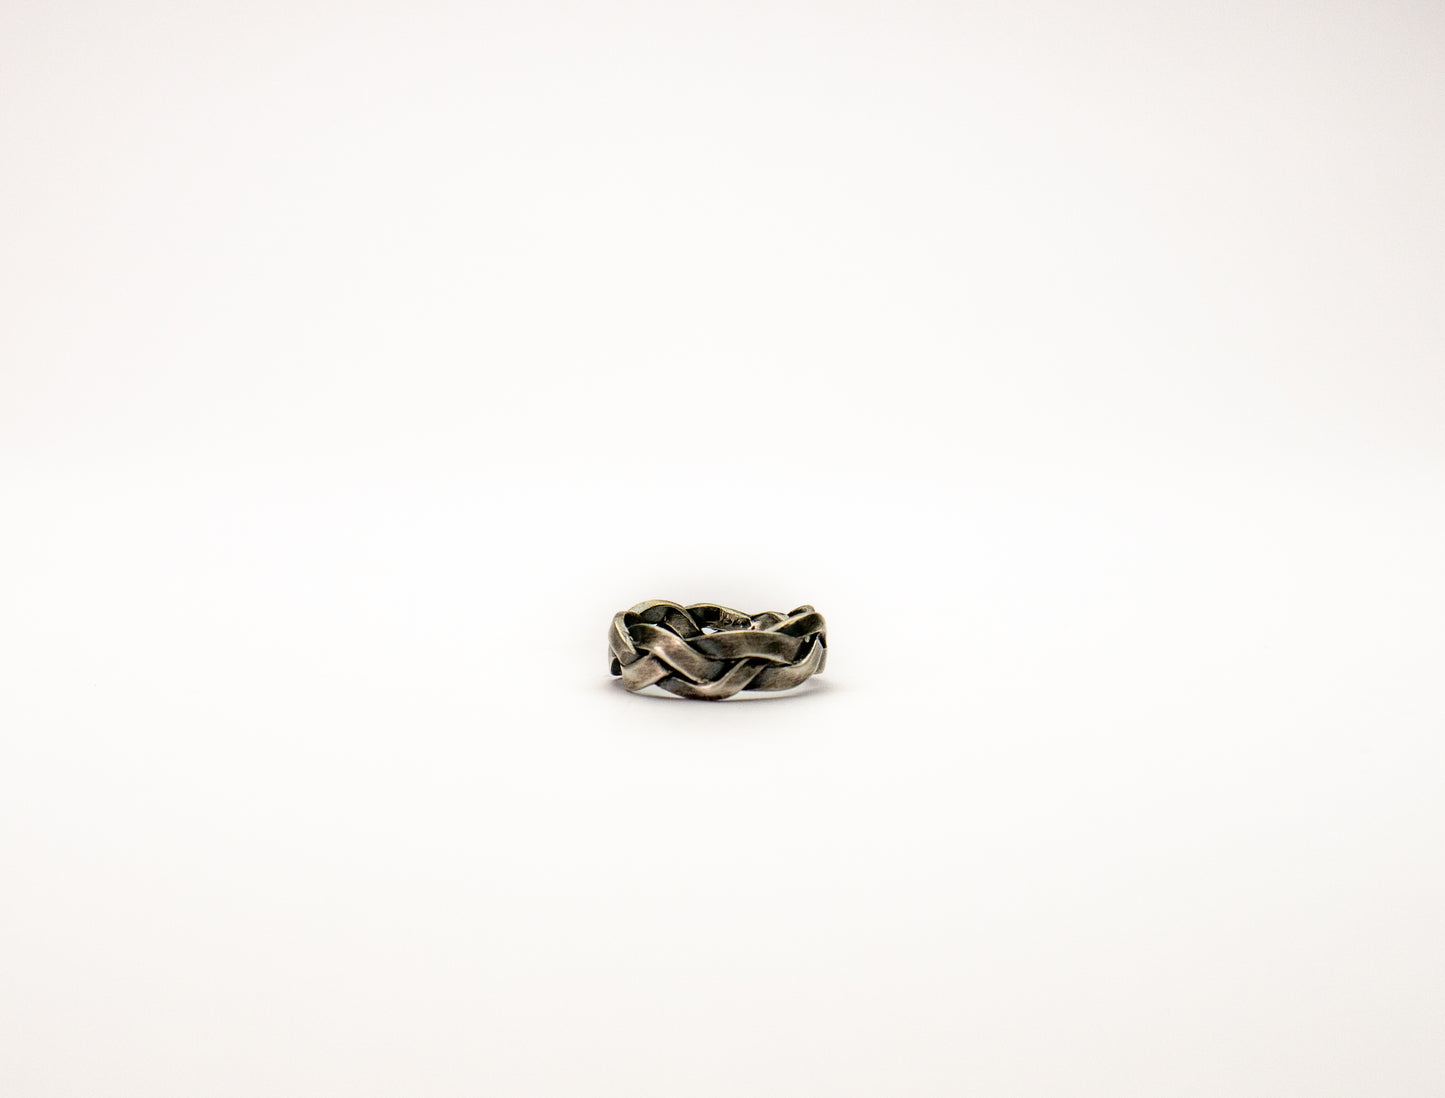 Wide Braid Sterling silver ring.